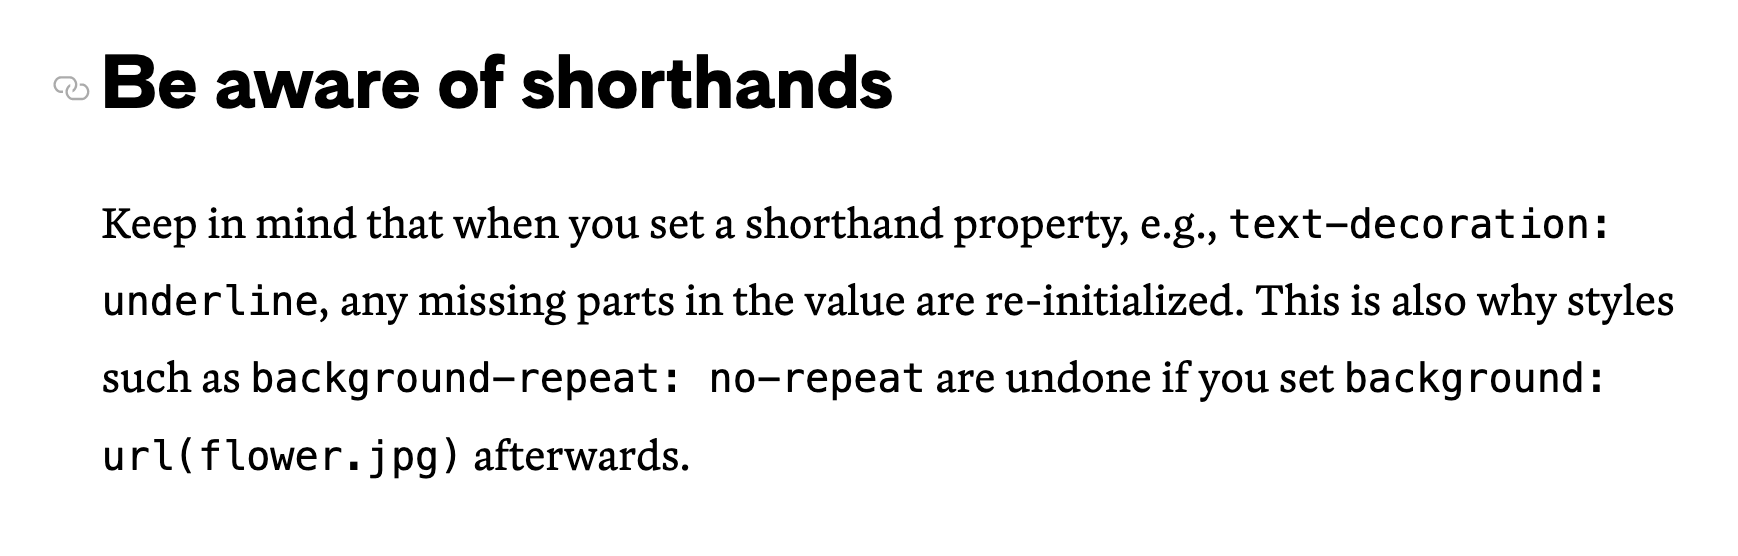 Be aware of shorthands – Keep in mind that when you set a shorthand property, e.g., text-decoration: underline, any missing parts in the value are re-initialized. This is also why styles such as background-repeat: no-repeat are undone if you set background: url(flower.jpg) afterwards.